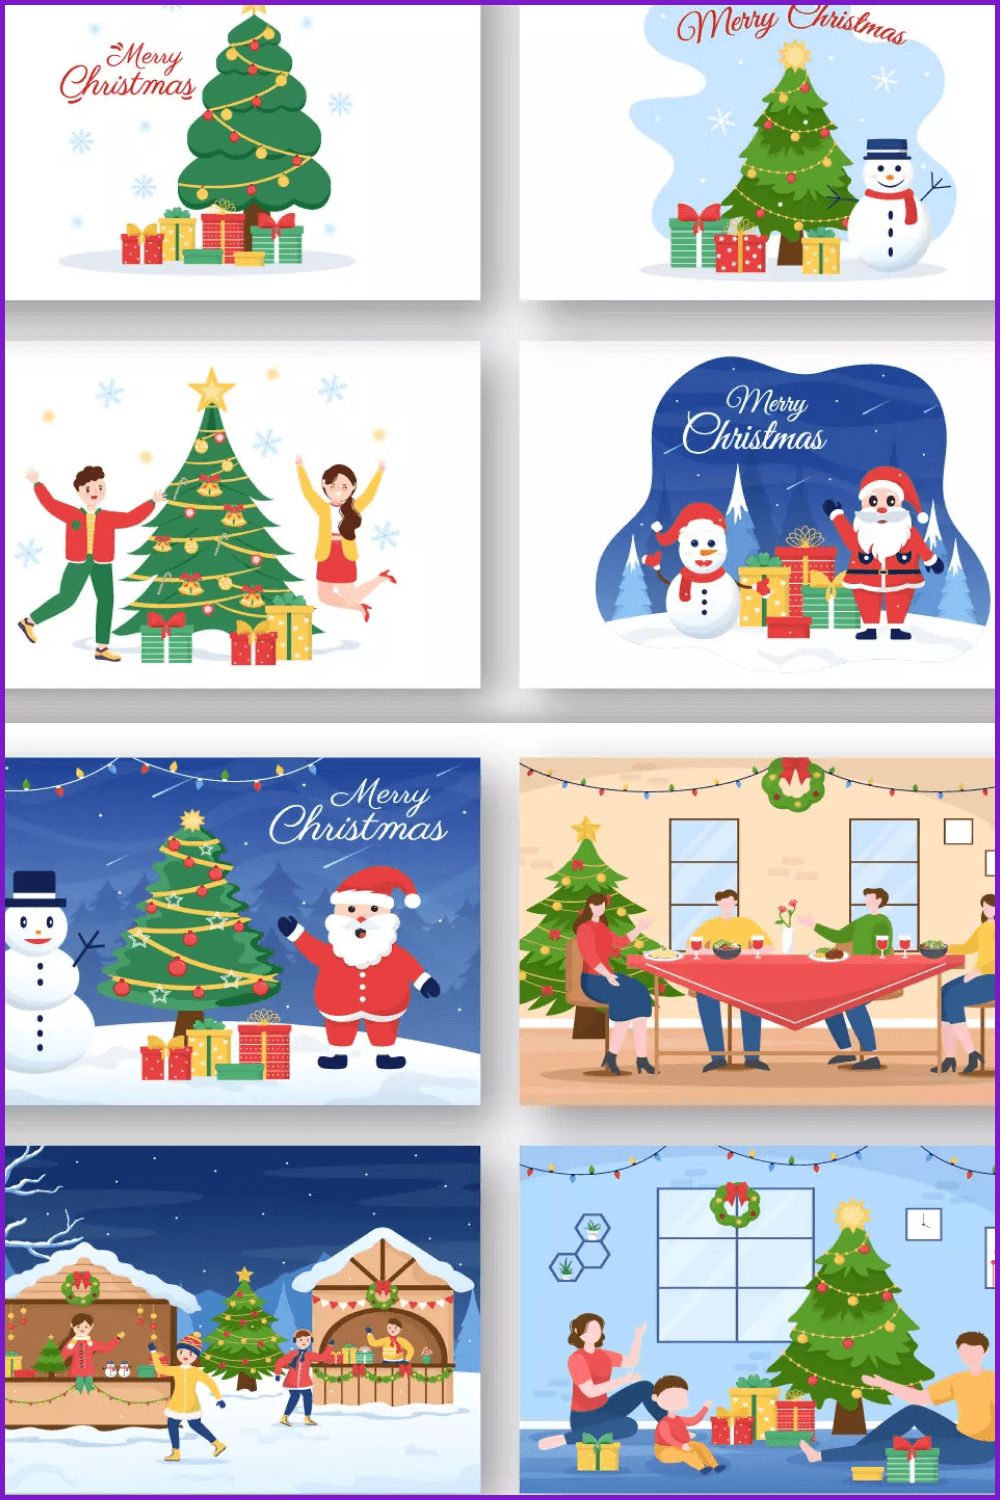 Collage of images of Christmas trees, snowmen, family, Santa Claus.